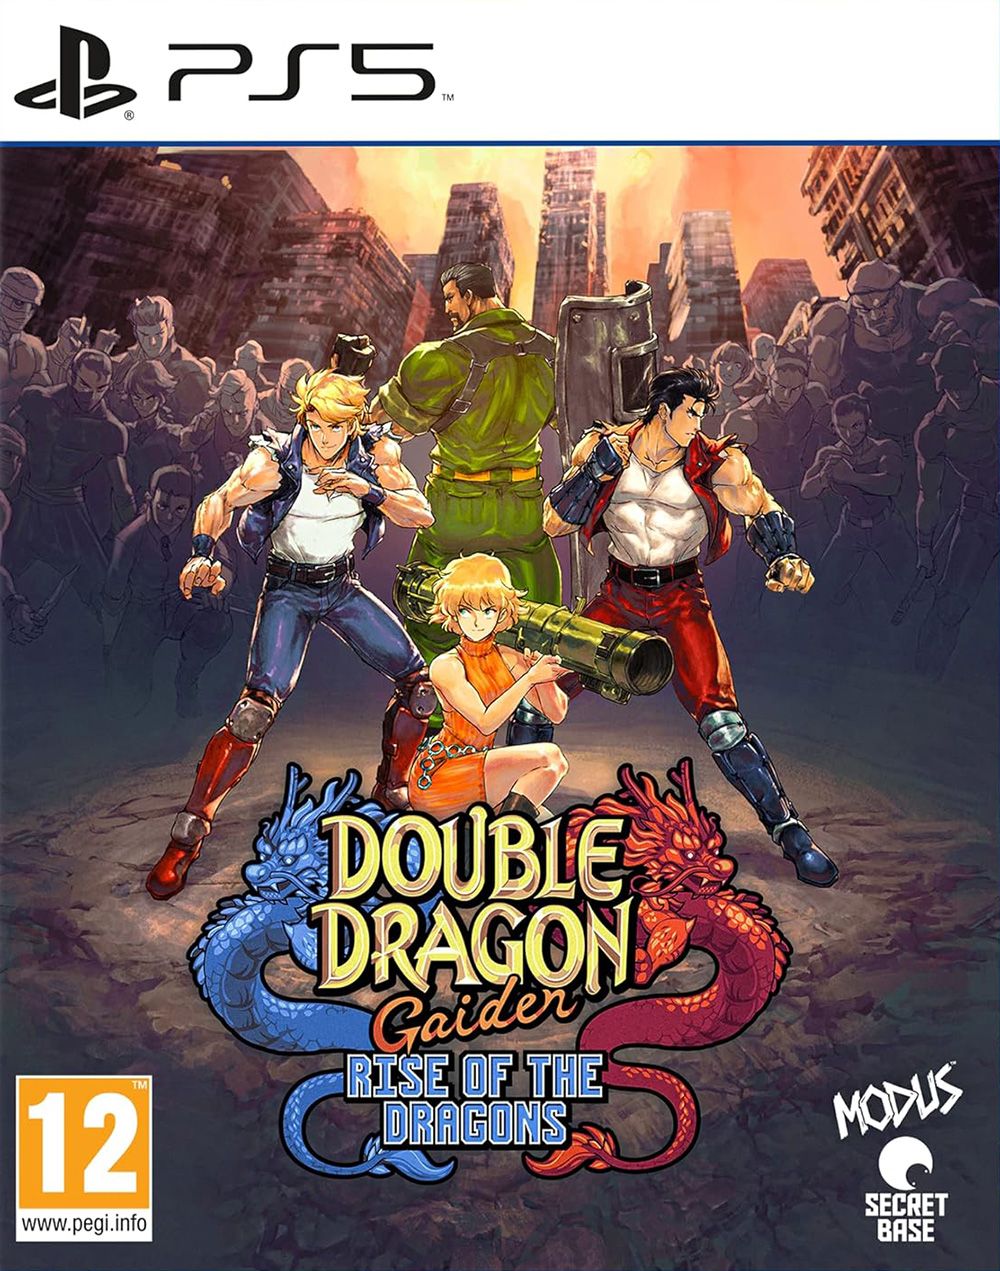 Double Dragon Gaiden: Rise of the Dragons (PS5) | PlayStation 5